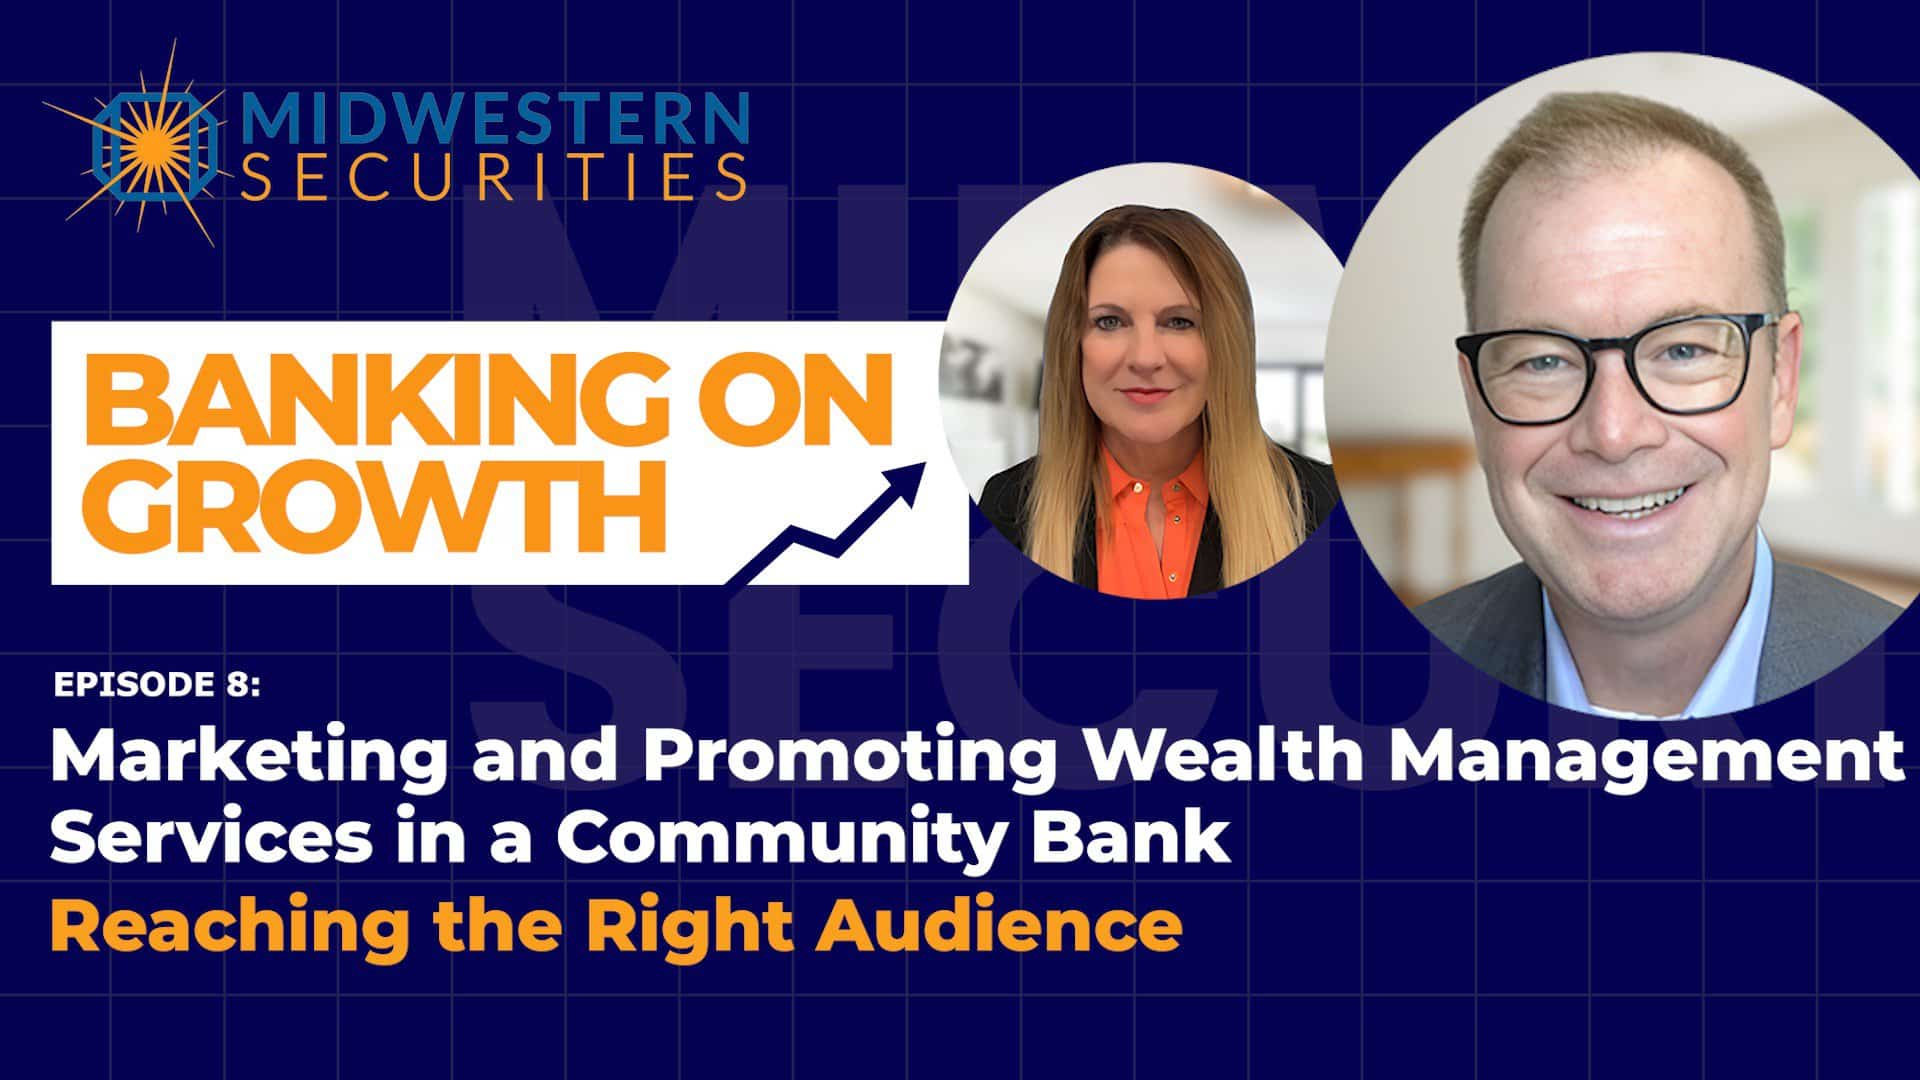 Marketing and Promoting Wealth Management Services in a Community Bank: Reaching the Right Audience